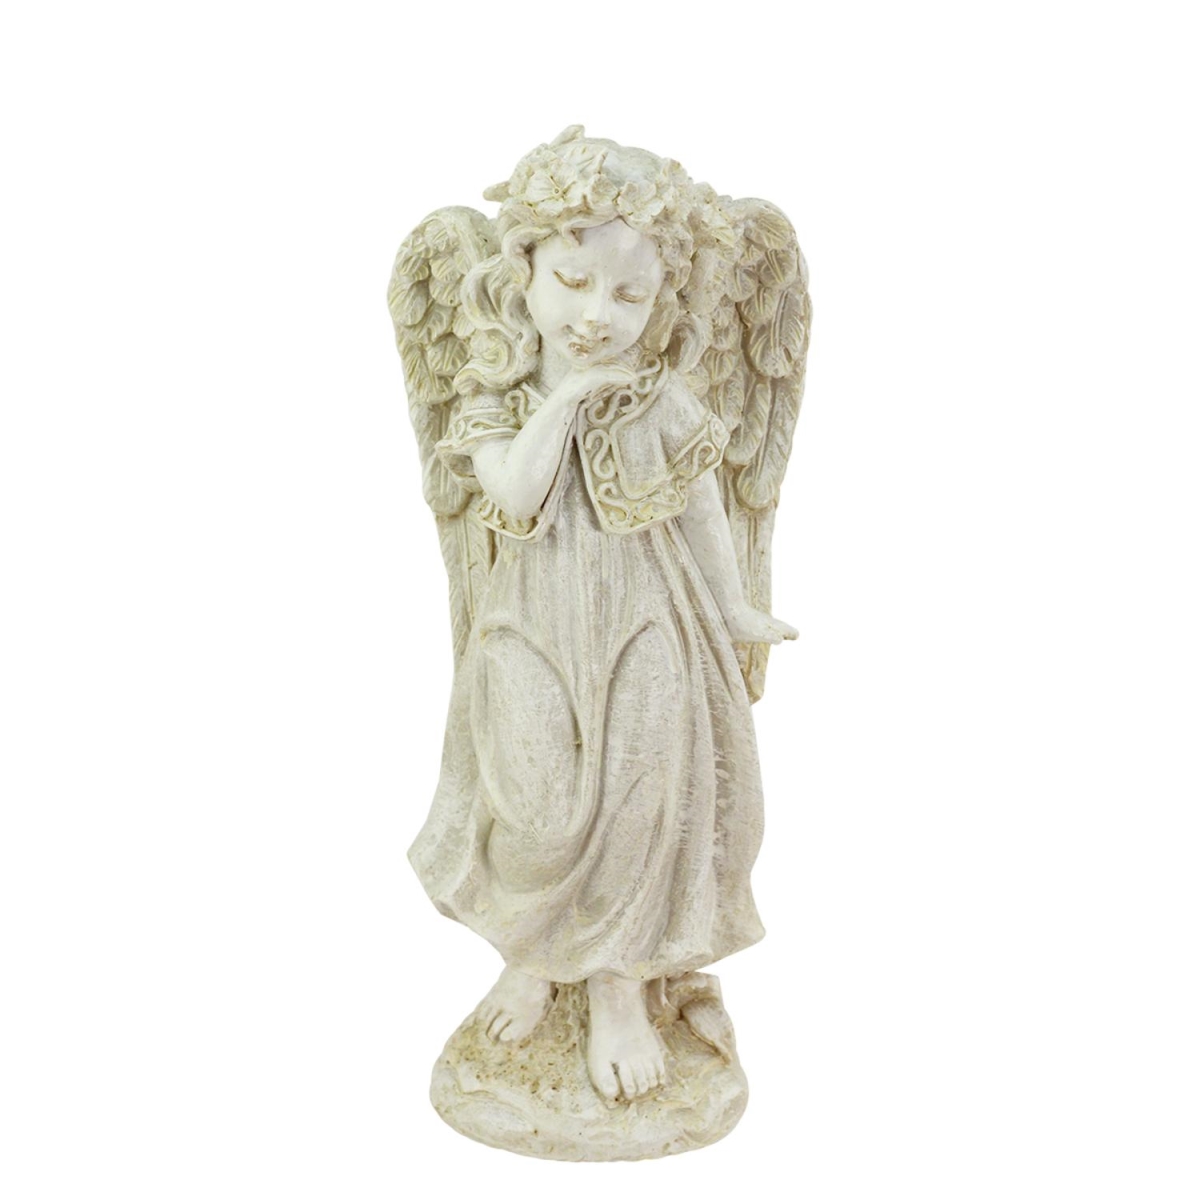 32038415 10.25 In. Heavenly Gardens Distressed Ivory Angel Girl With Floral Crown Outdoor Patio Garden Statue